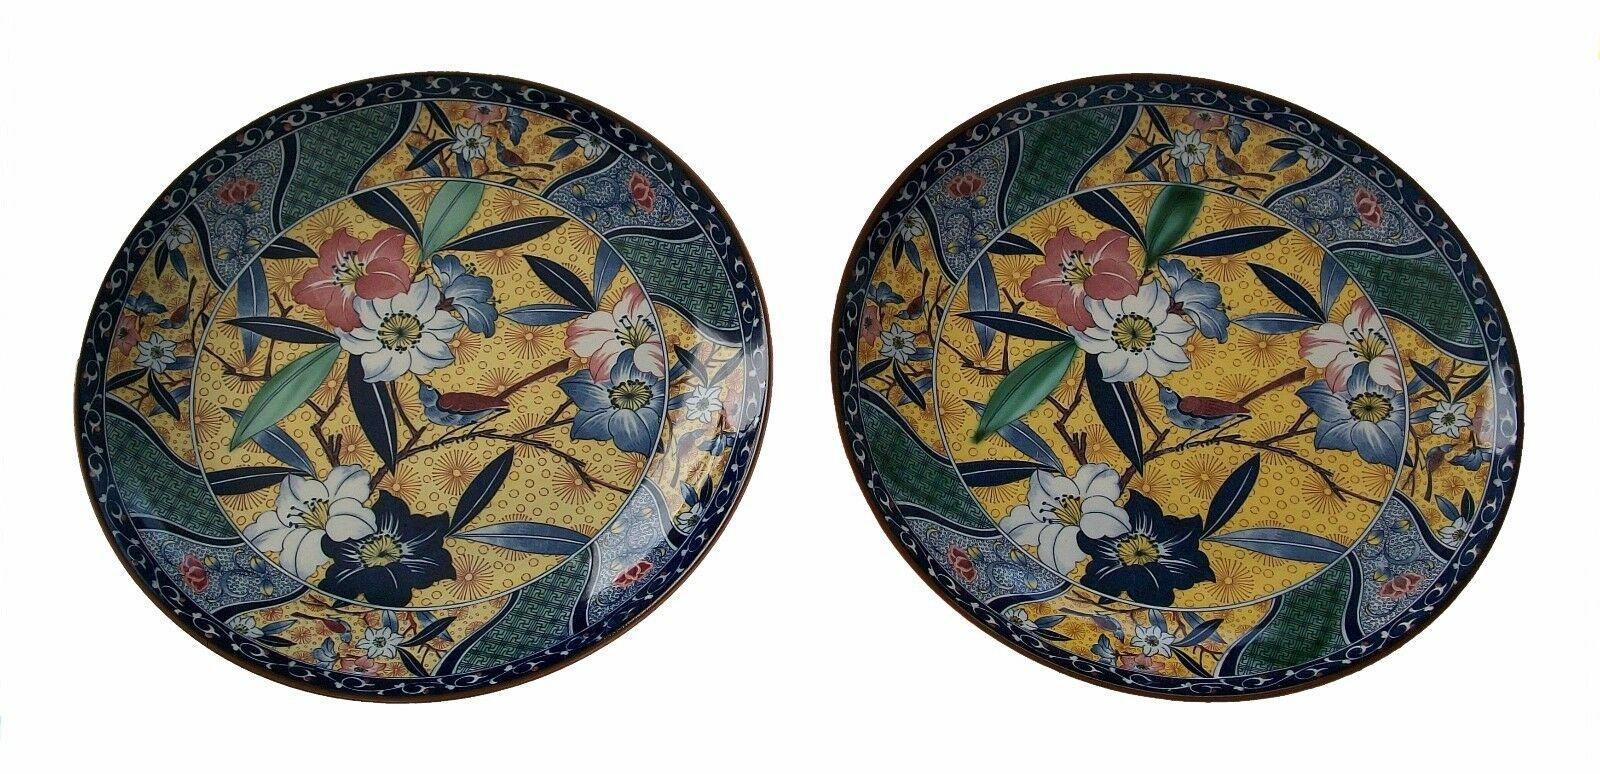 Anglo-Japanese Arts & Crafts Style Transfer Decorated Chargers - Signed - Japan - 20th Century For Sale